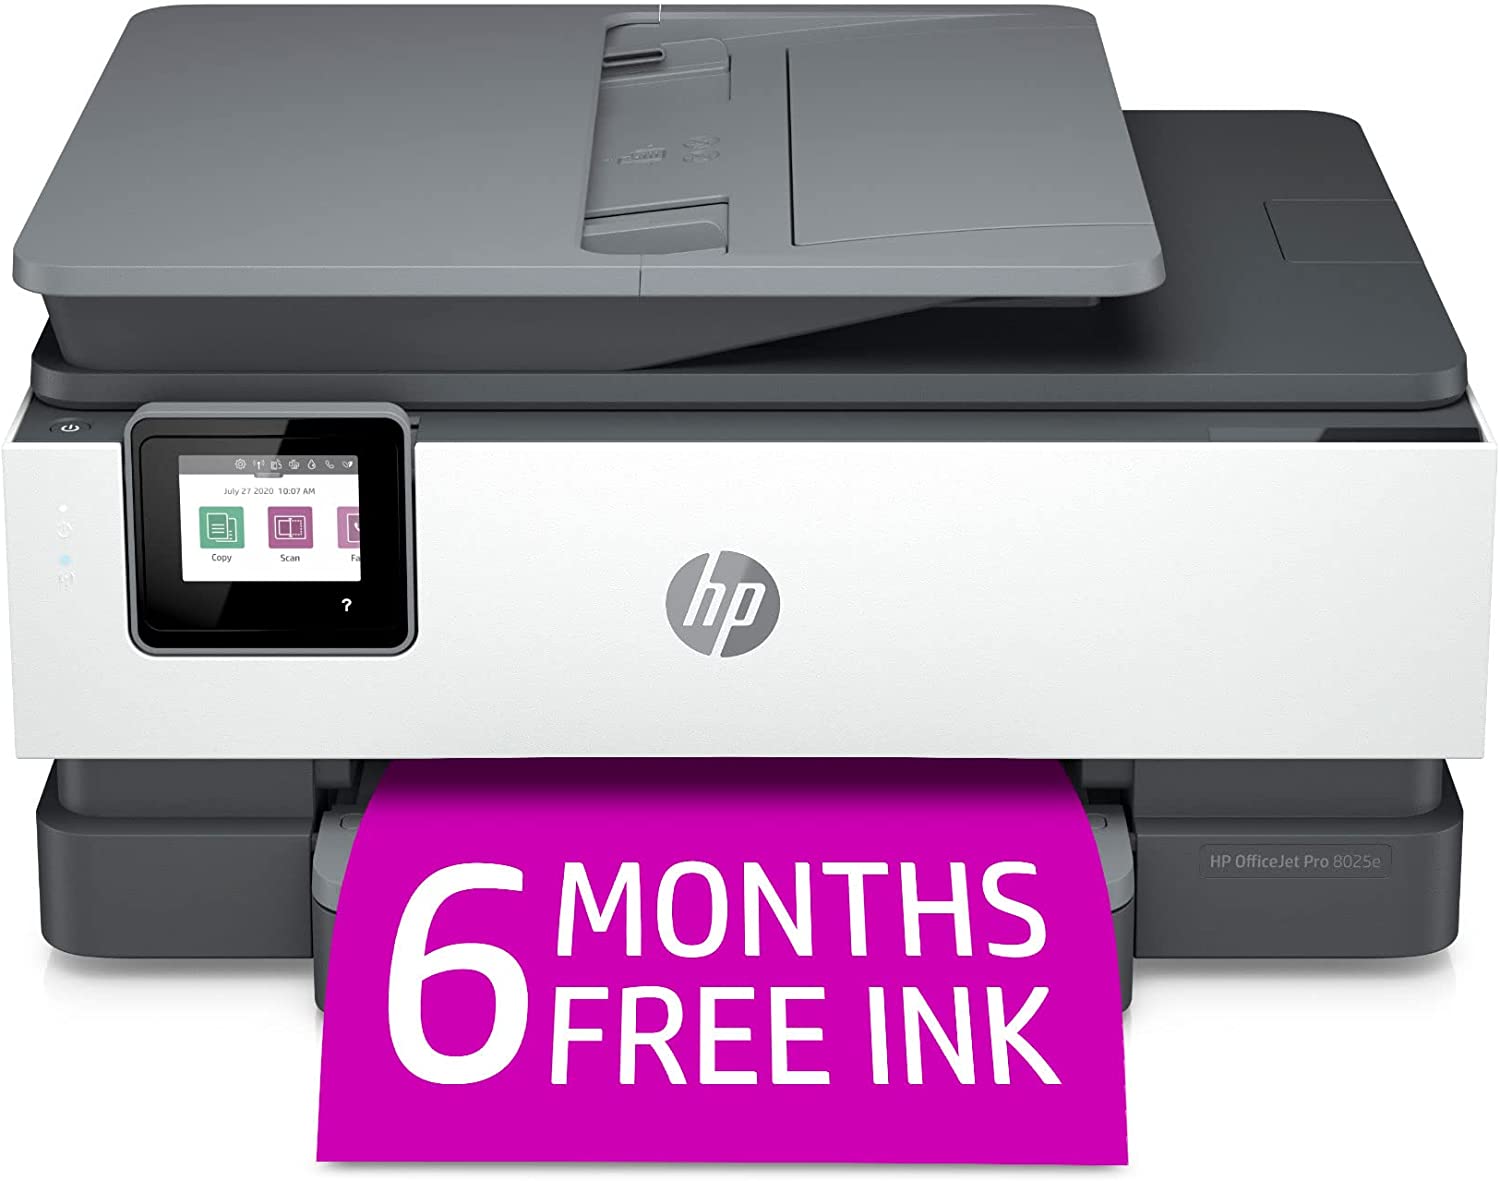 HP OfficeJet Pro 8025e Wireless Color All-in-One [...]